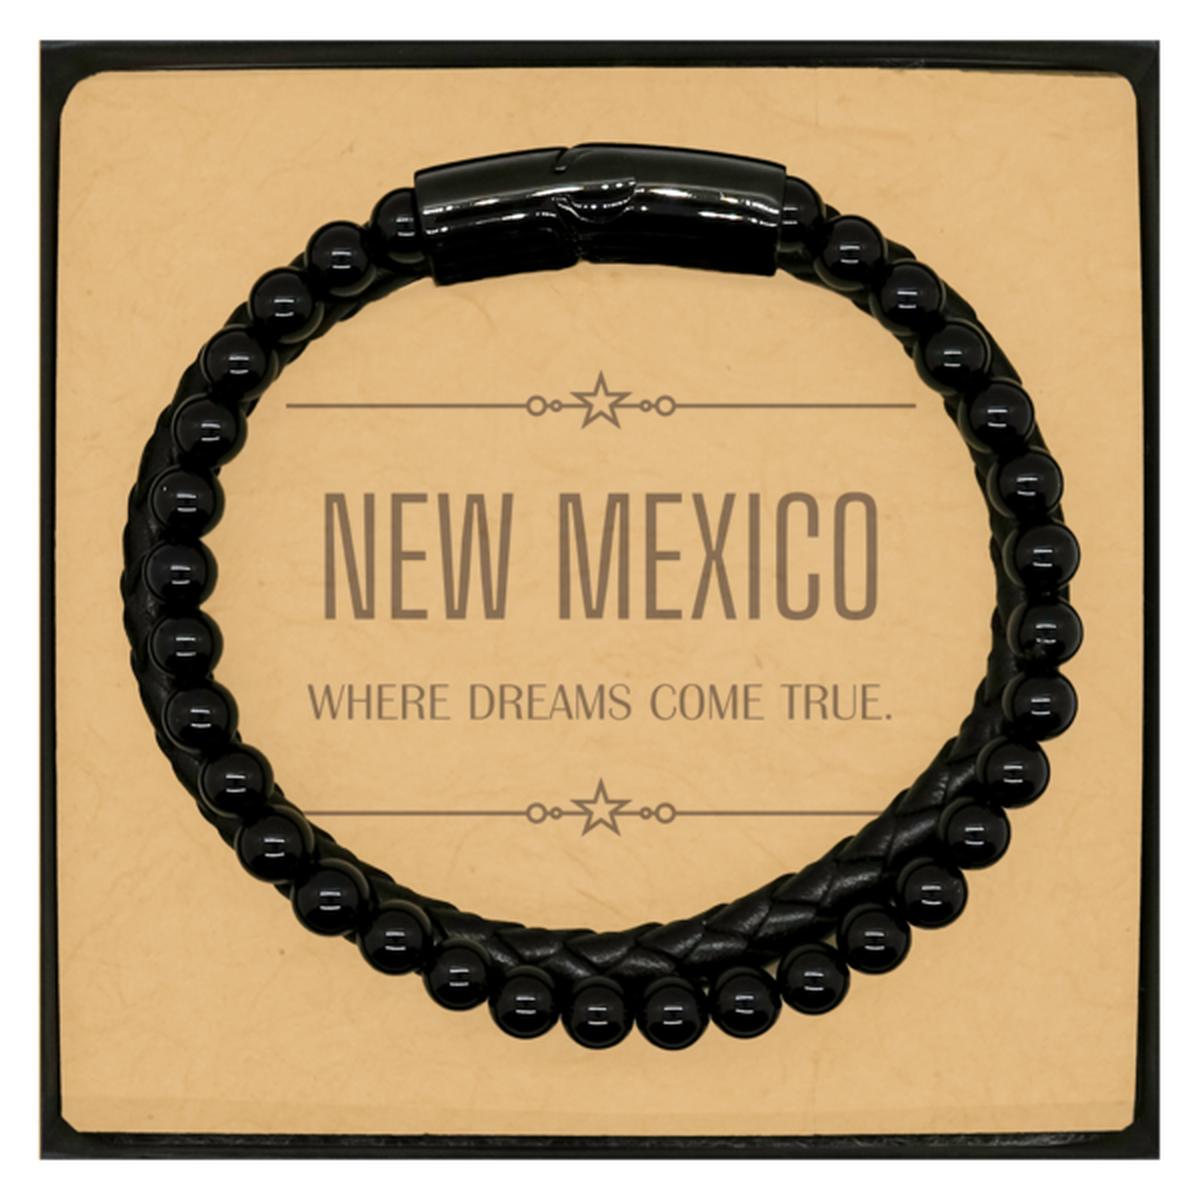 Love New Mexico State Stone Leather Bracelets, New Mexico Where dreams come true, Birthday Christmas Inspirational Gifts For New Mexico Men, Women, Friends